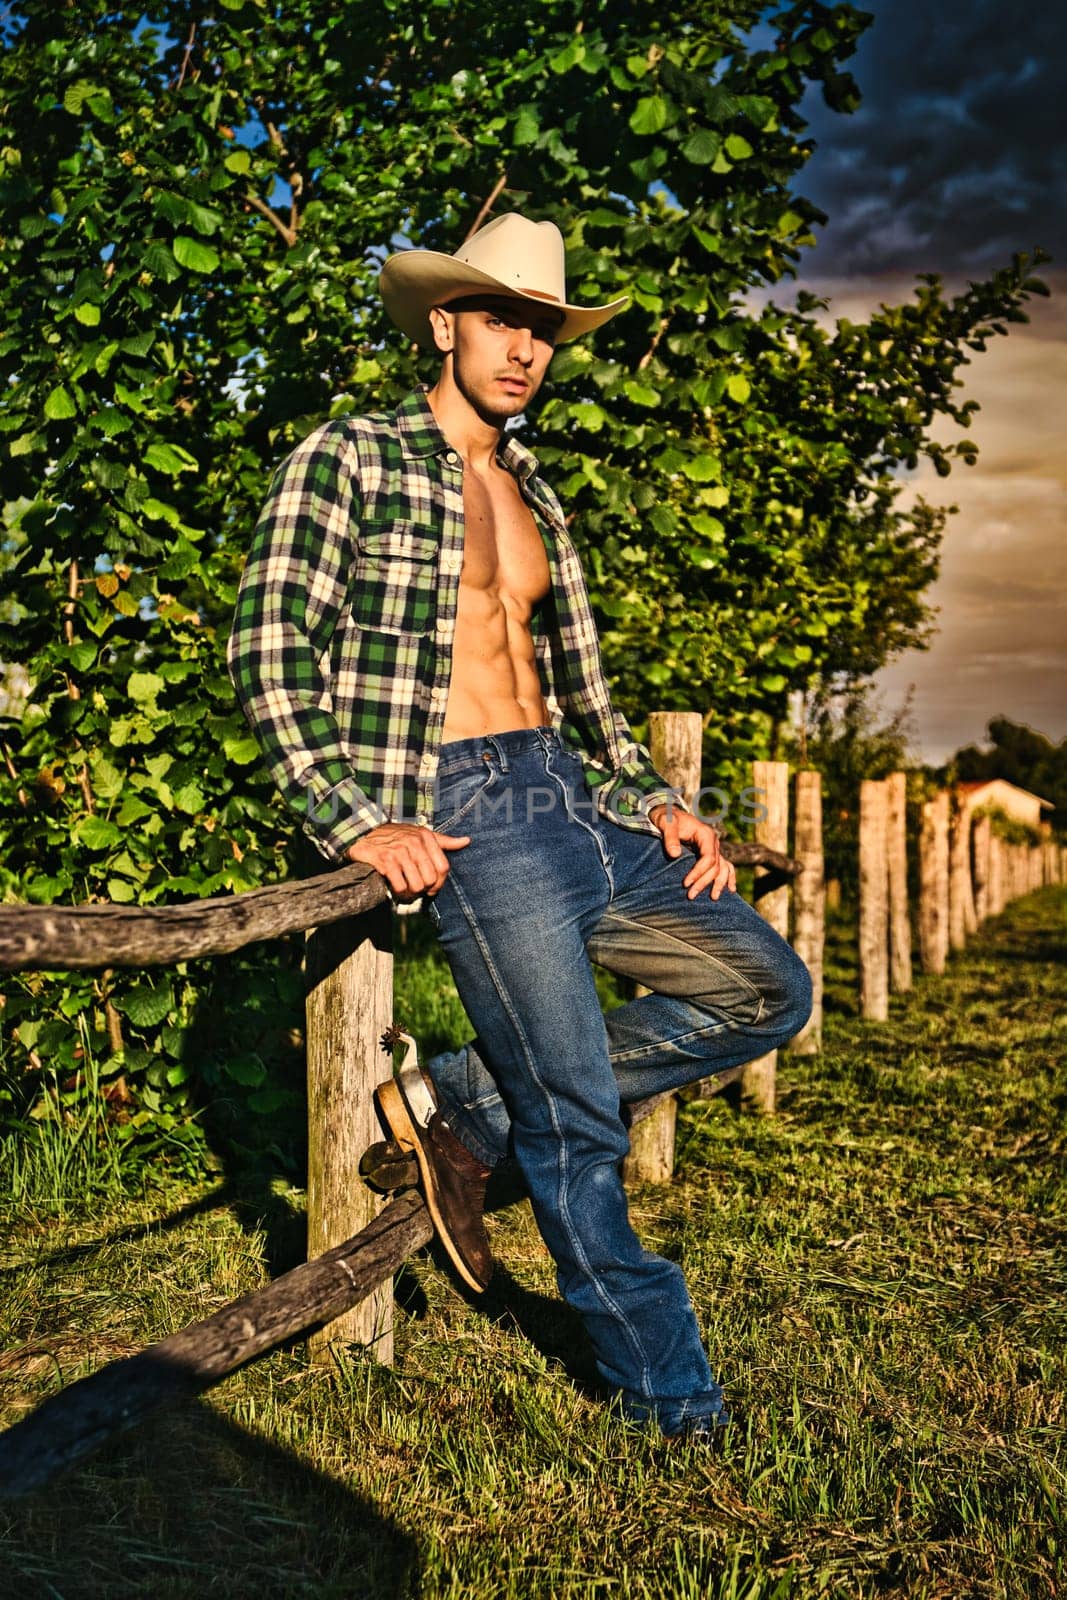 Photo of a shirtless man sitting on a wooden fence by artofphoto